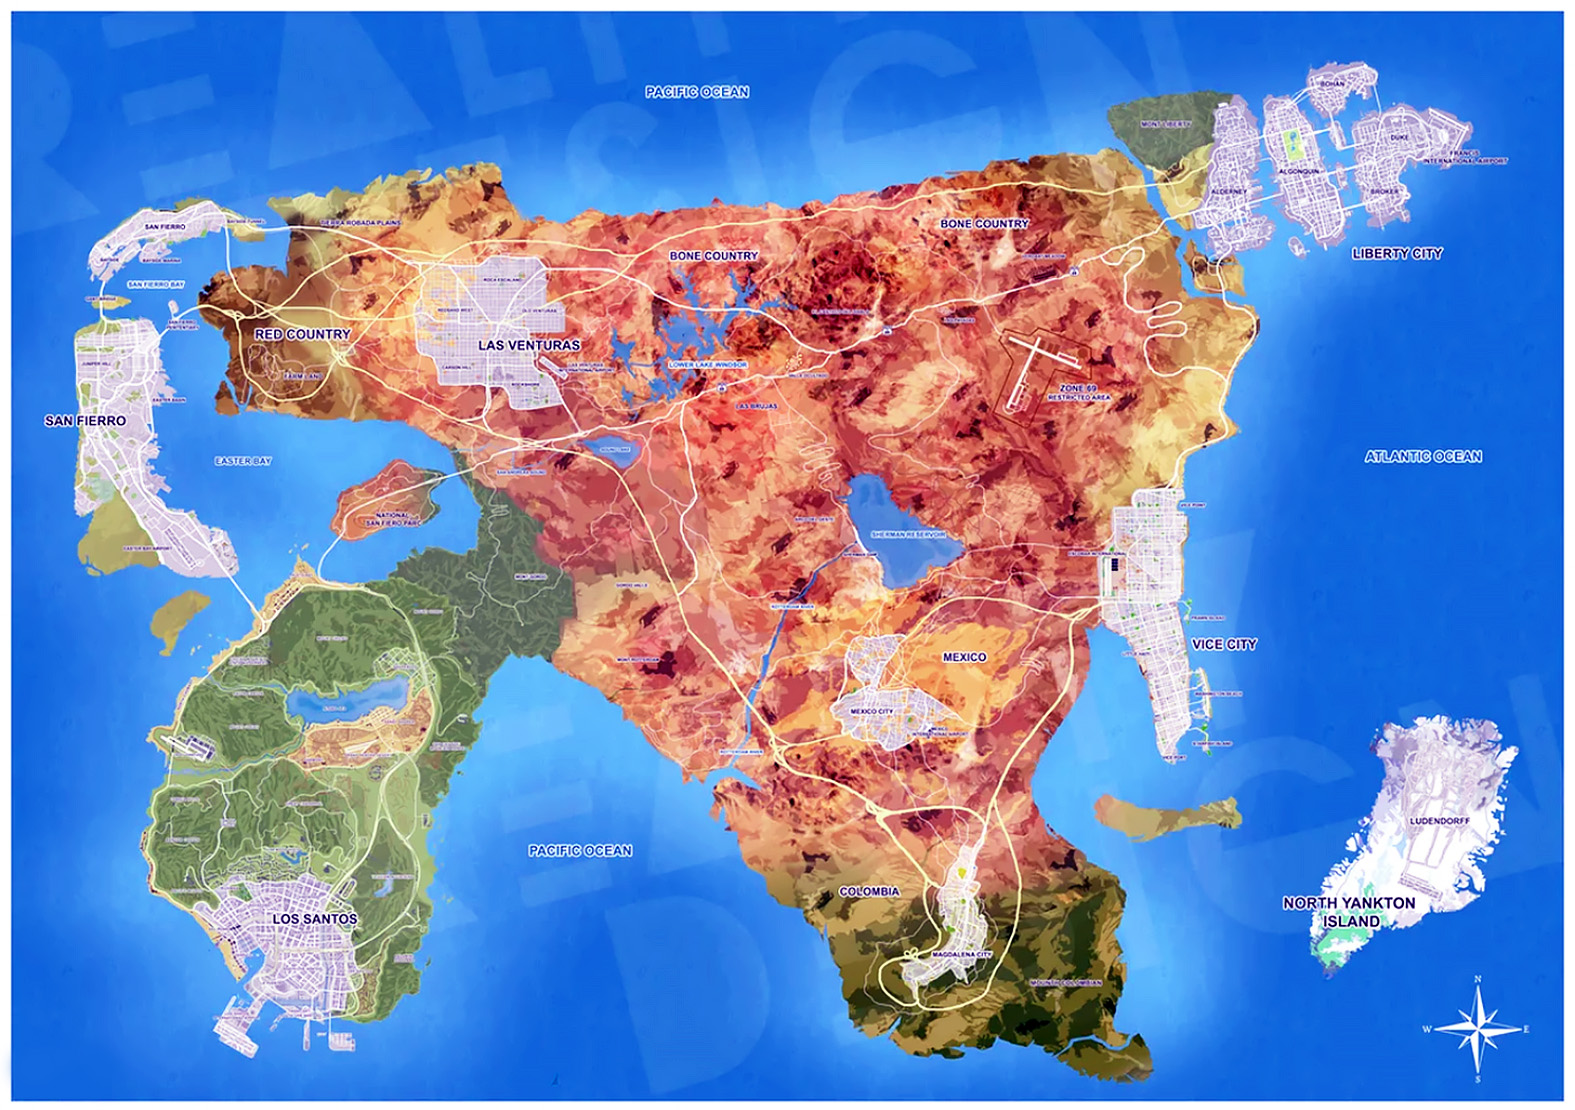 GTA 6 world concept map  Games  Mapsland  Maps of the World